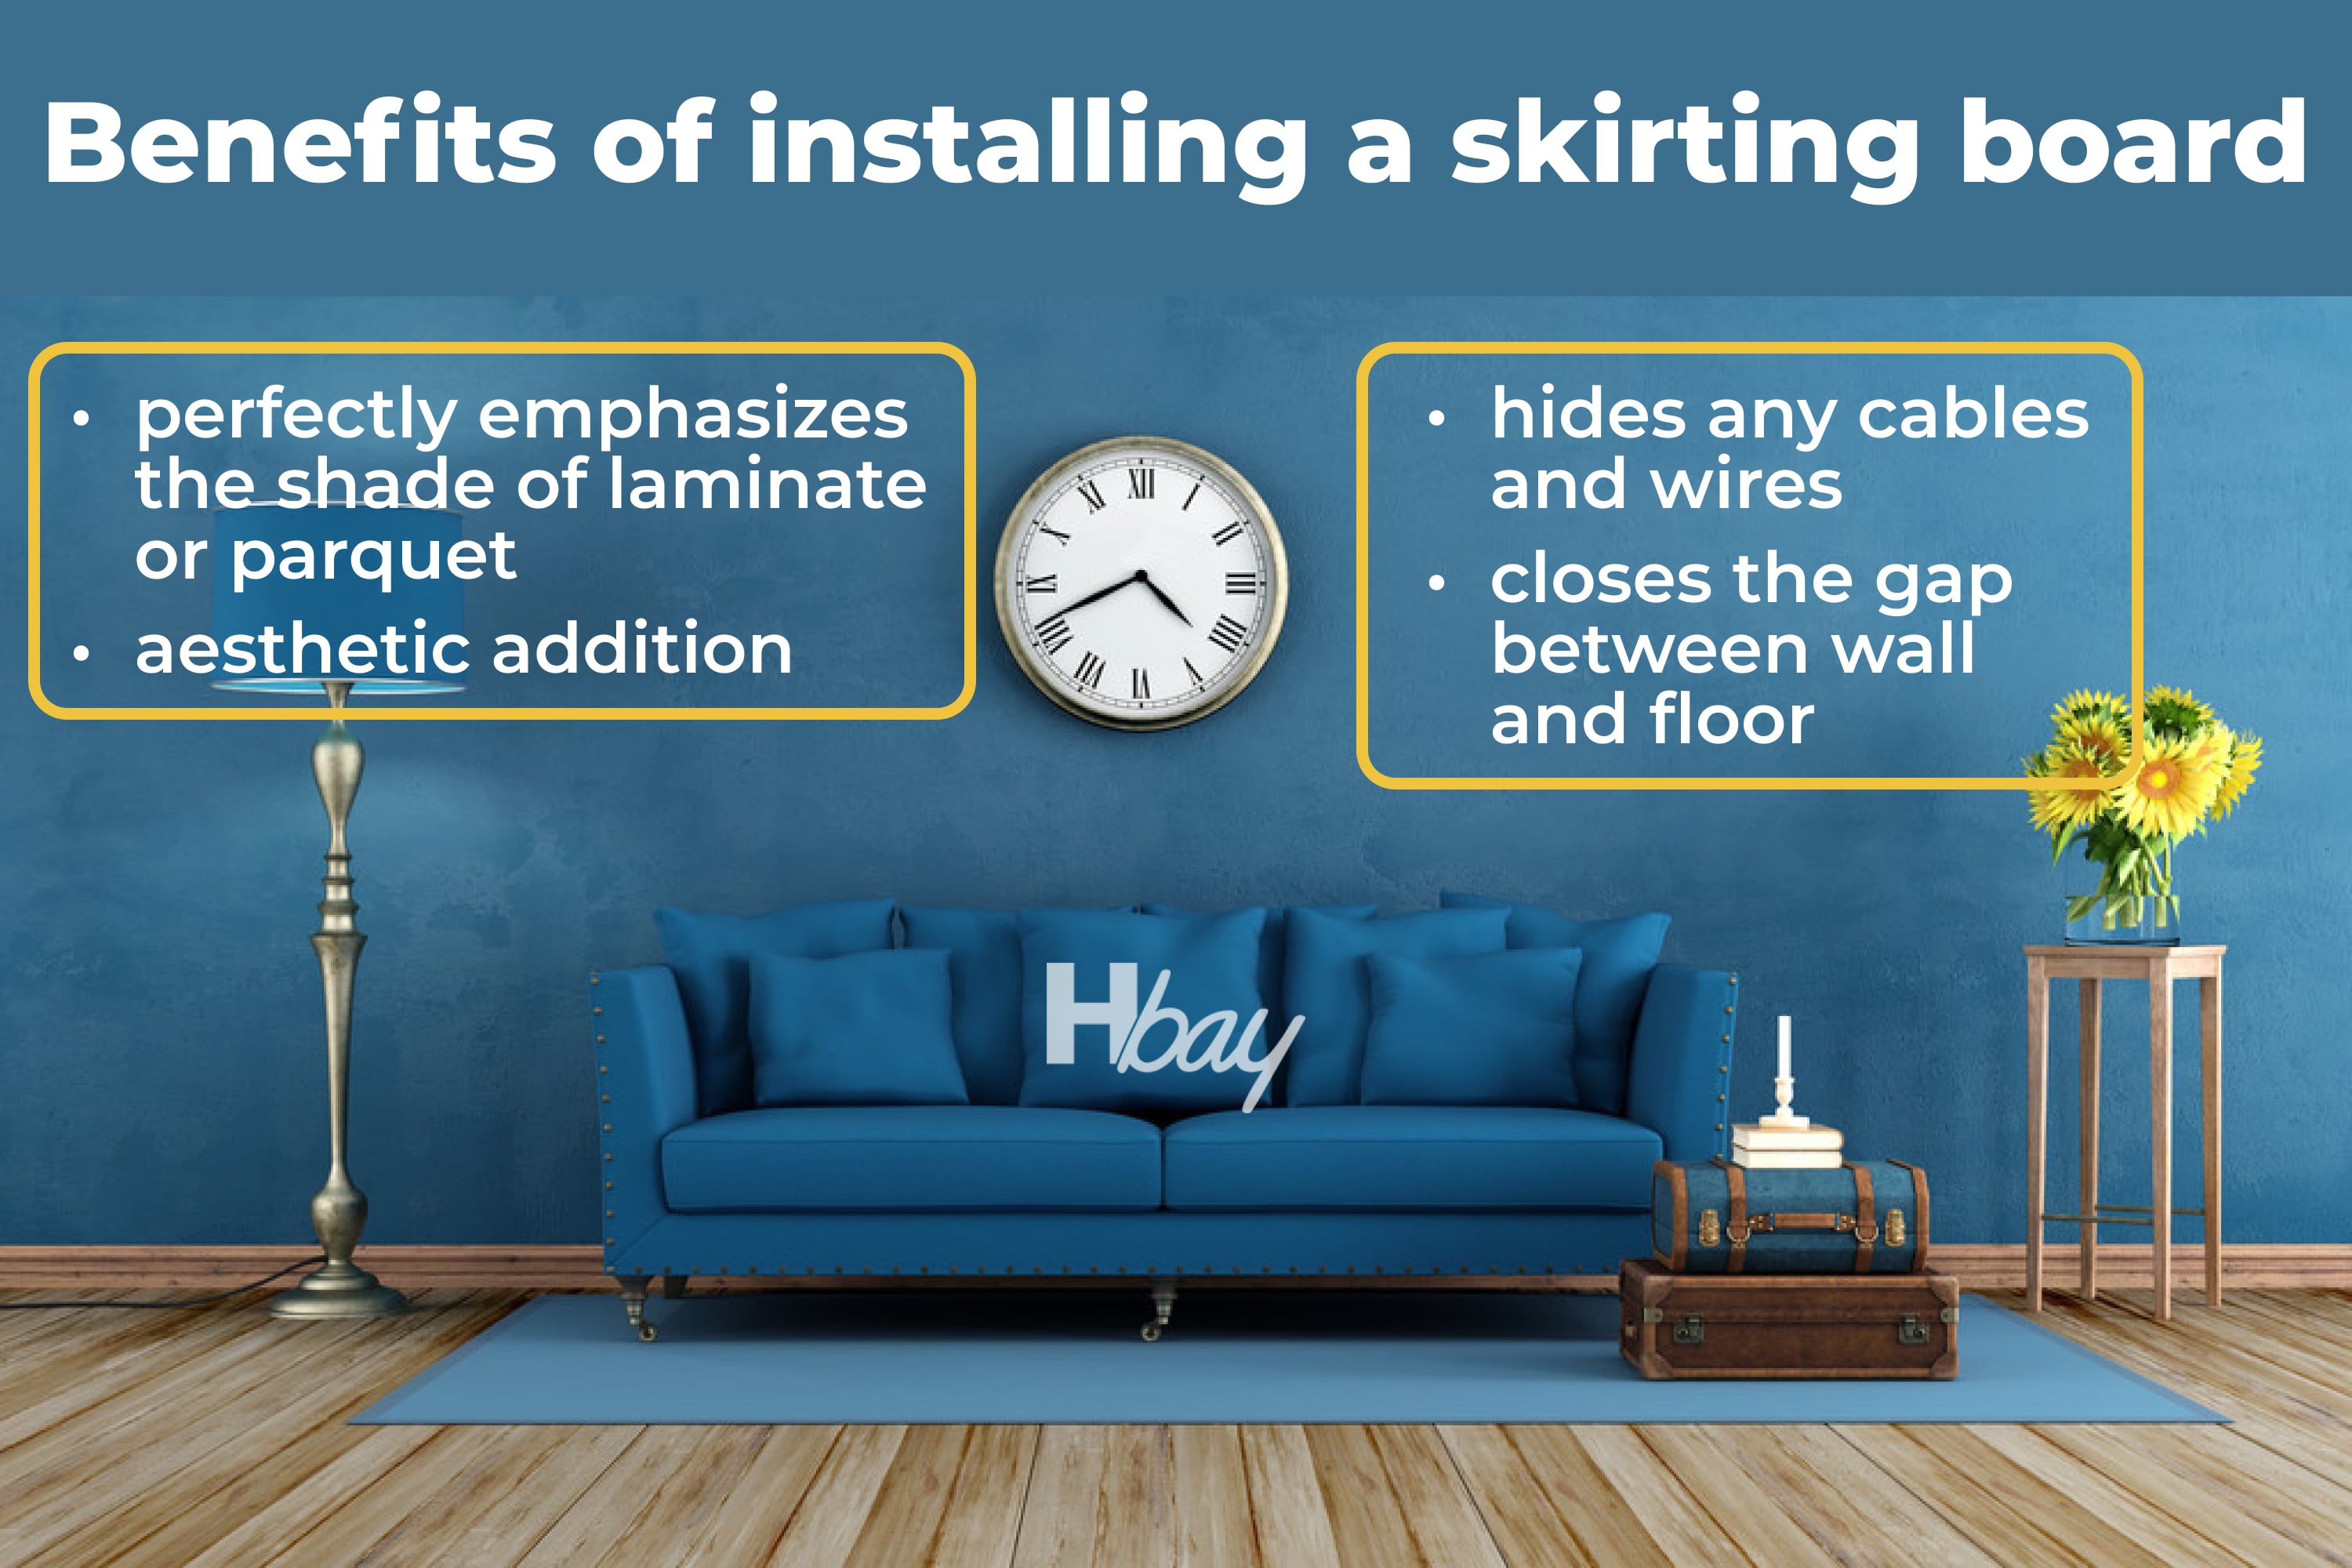 Benefits of installing a skirting board